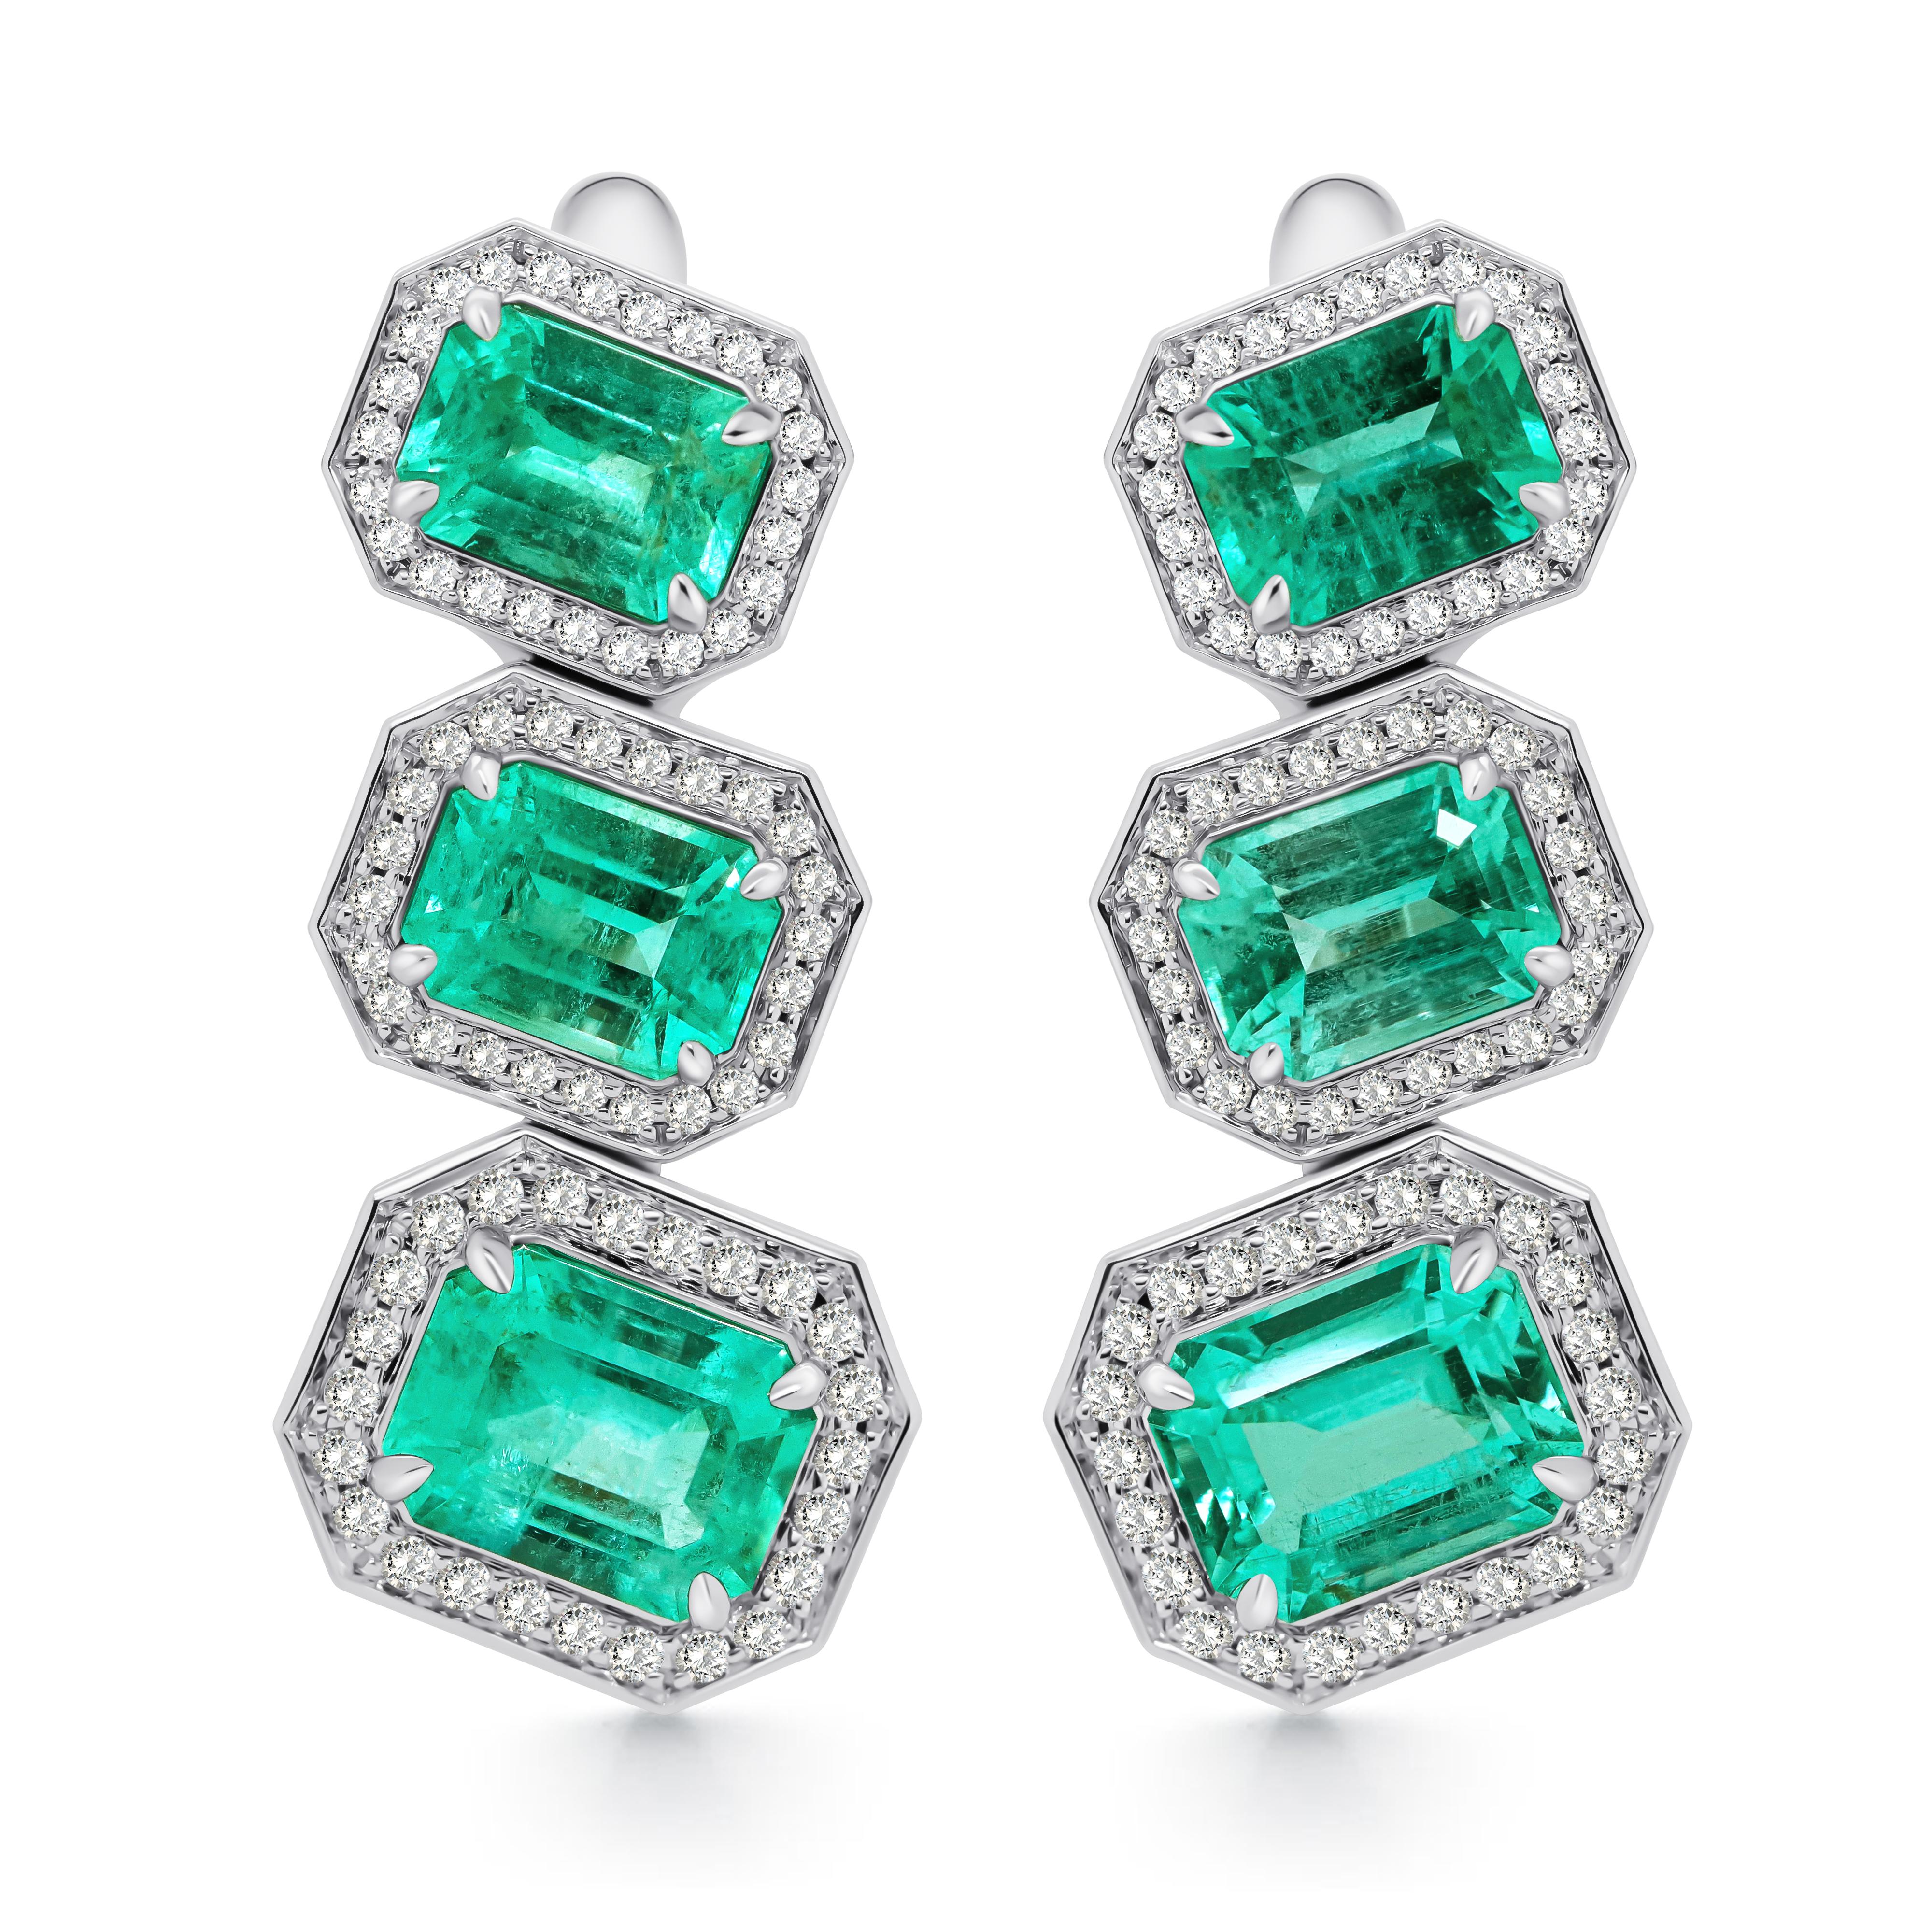 The rich beauty of Emerald is enclosed in every reflection.

Centered by six perfectly matched green Russian Emeralds totaling 6.42 Carats, accented by 144 Round-Brilliant Cut Diamonds, and set in lush 18K White Gold. These stunning earrings are a